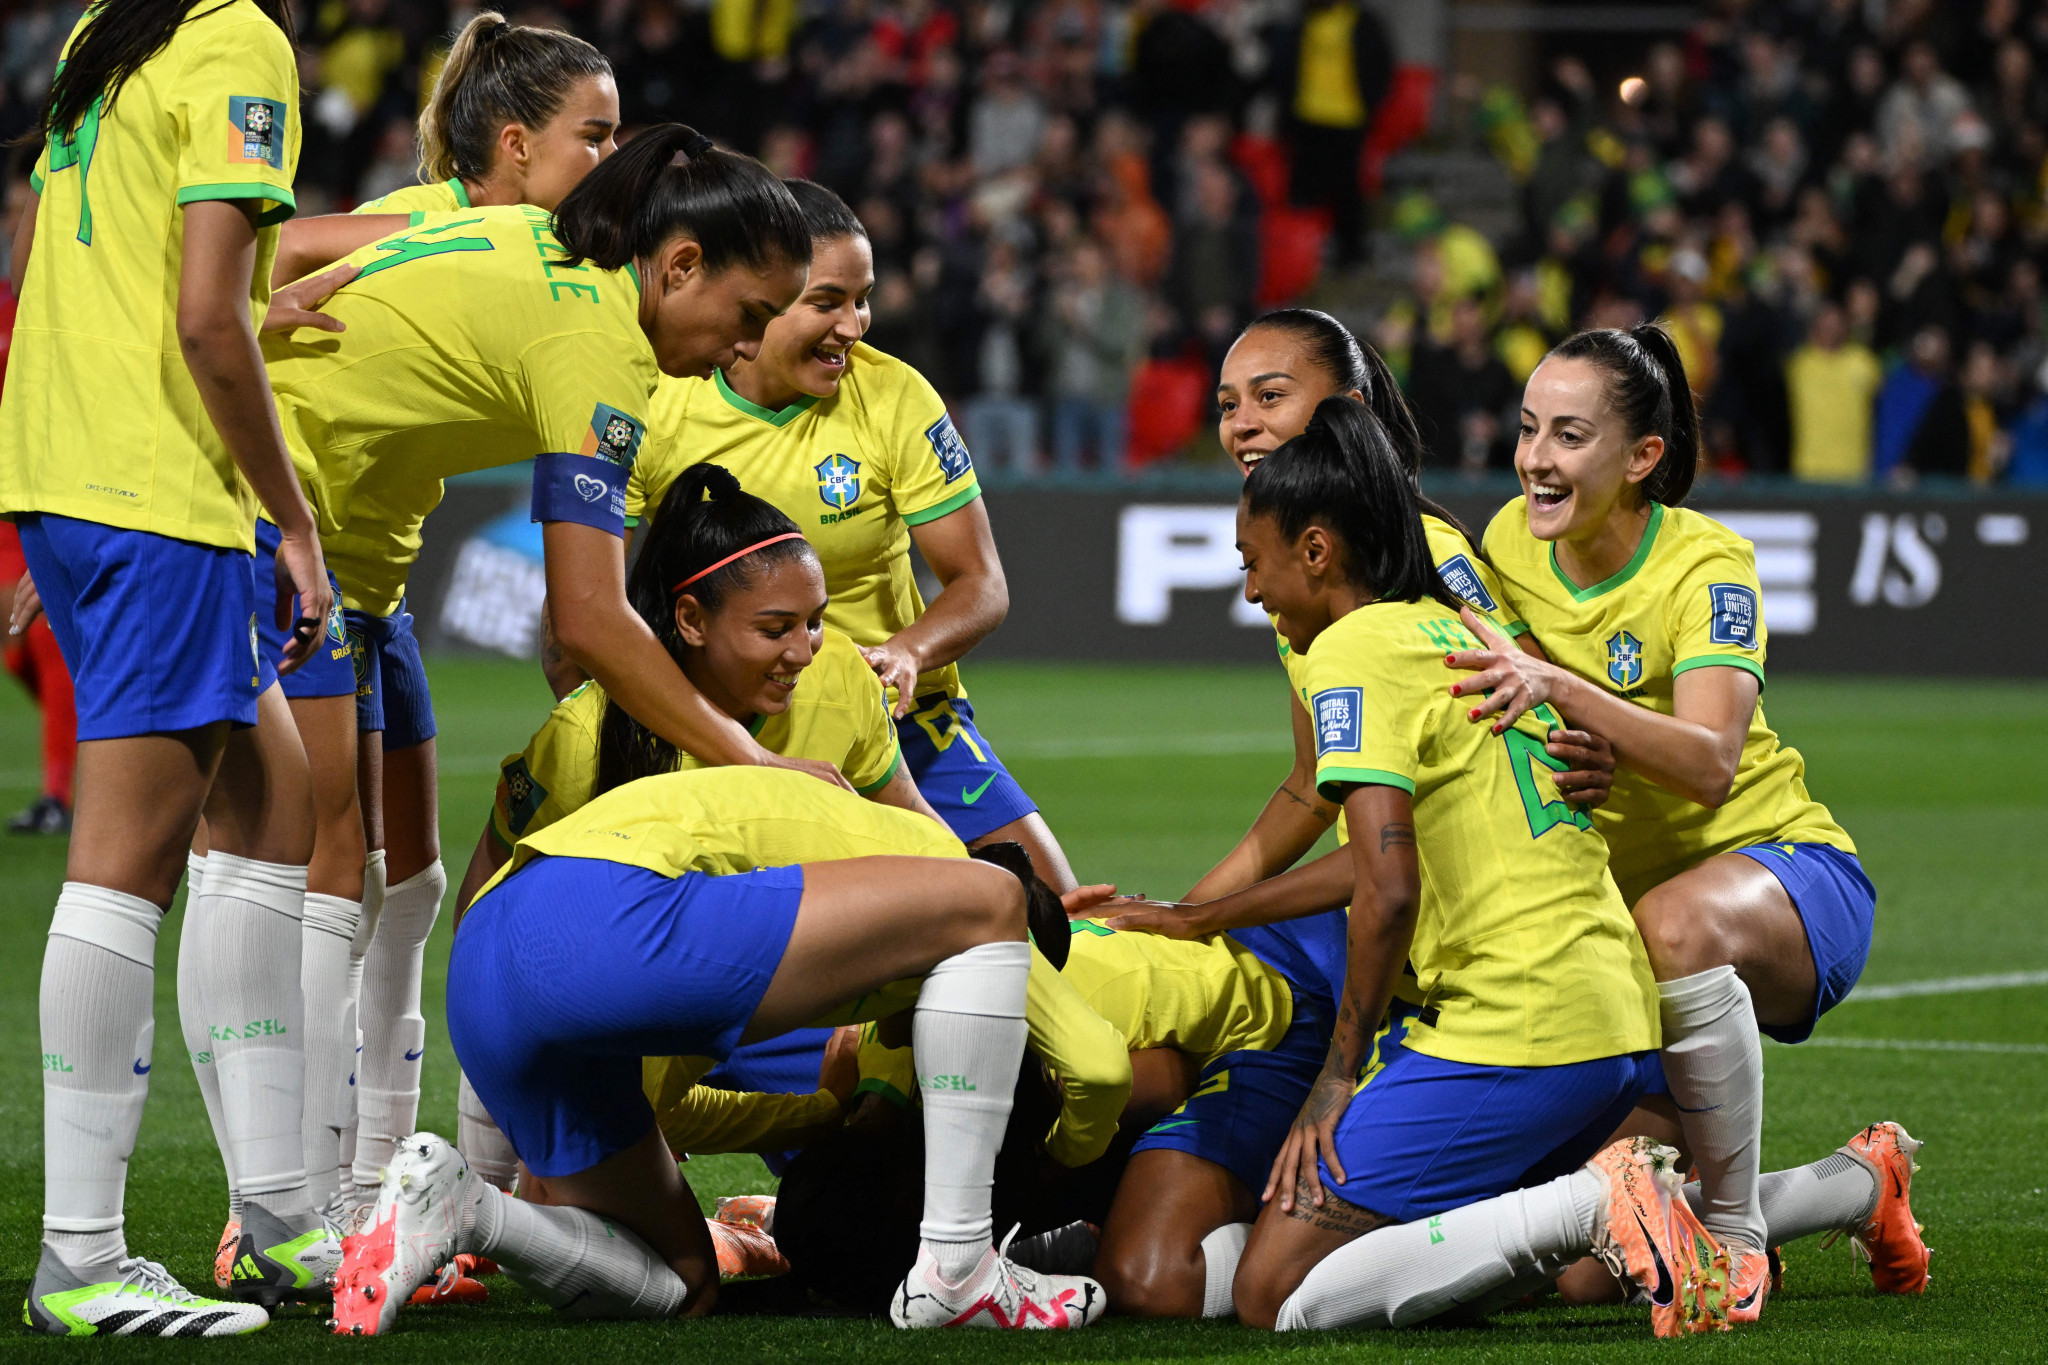 Brazil's best run at the FIFA Women's World Cup was in 2007 when they finished as runners-up, and they began with a thumping 4-0 win against Panama in Adelaide ©Getty Images